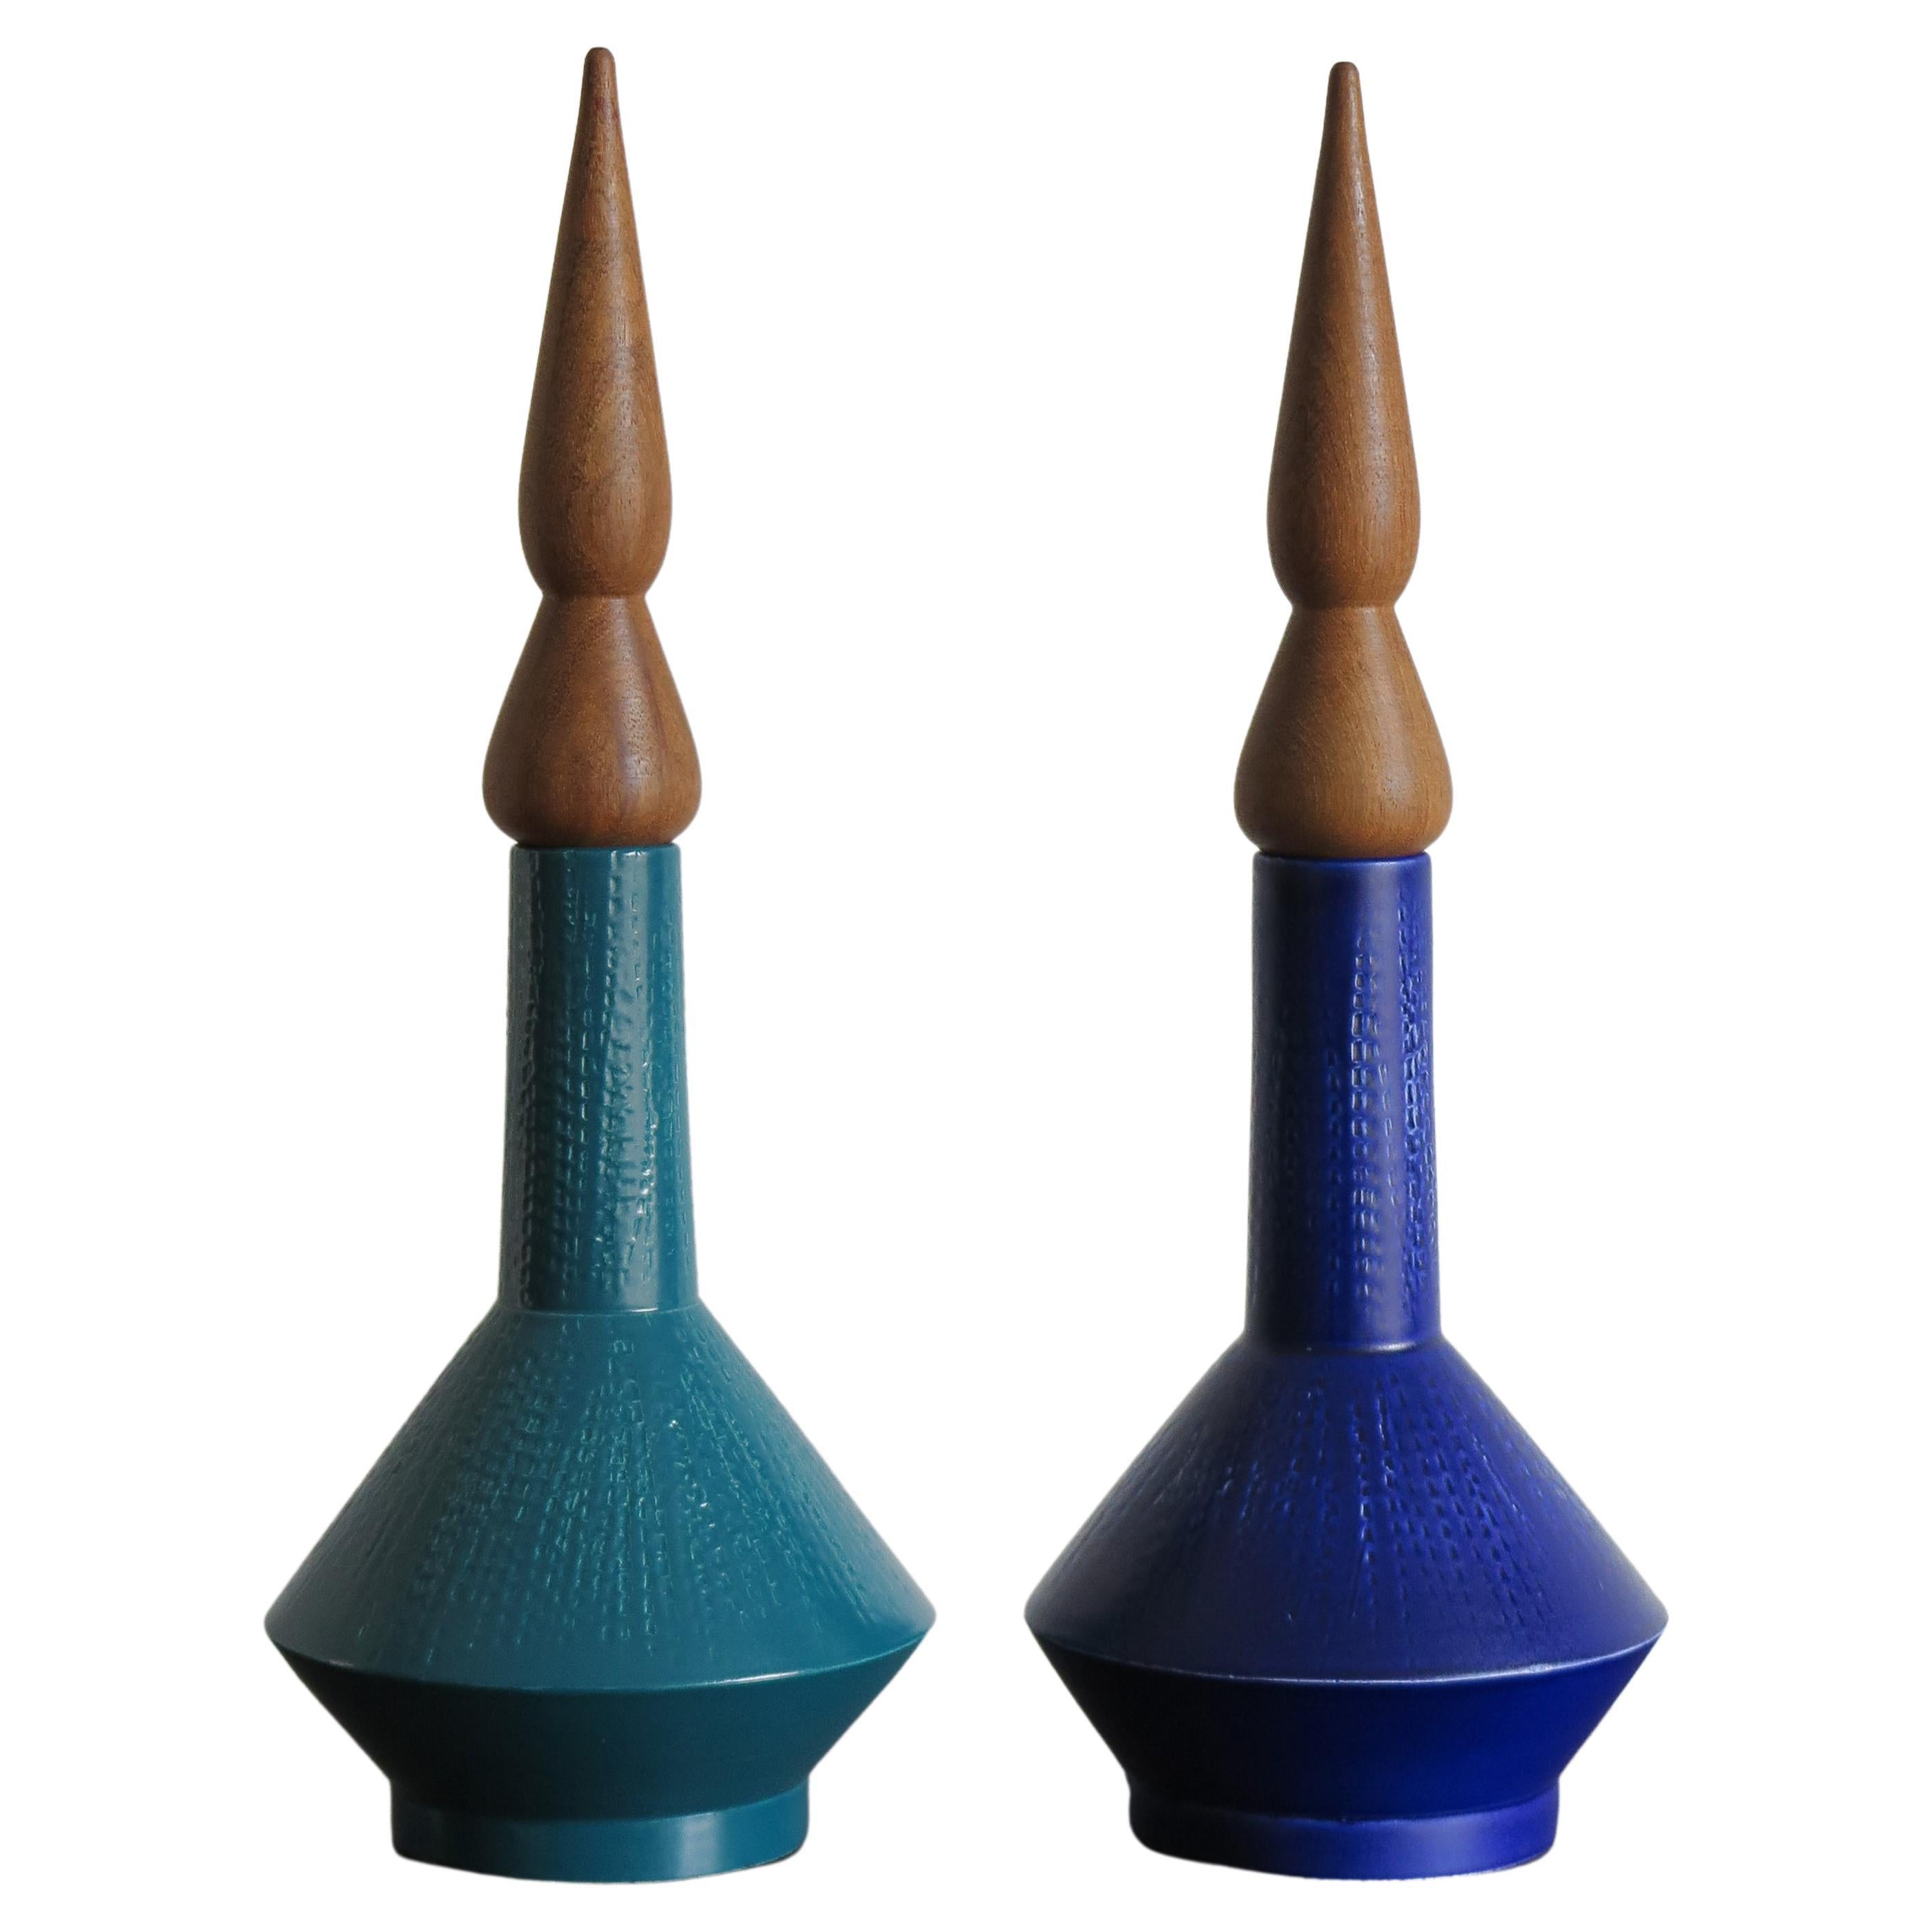 Contemporary Blue Green Ceramic Vases Designed by Capperidicasa, Made in Italy For Sale